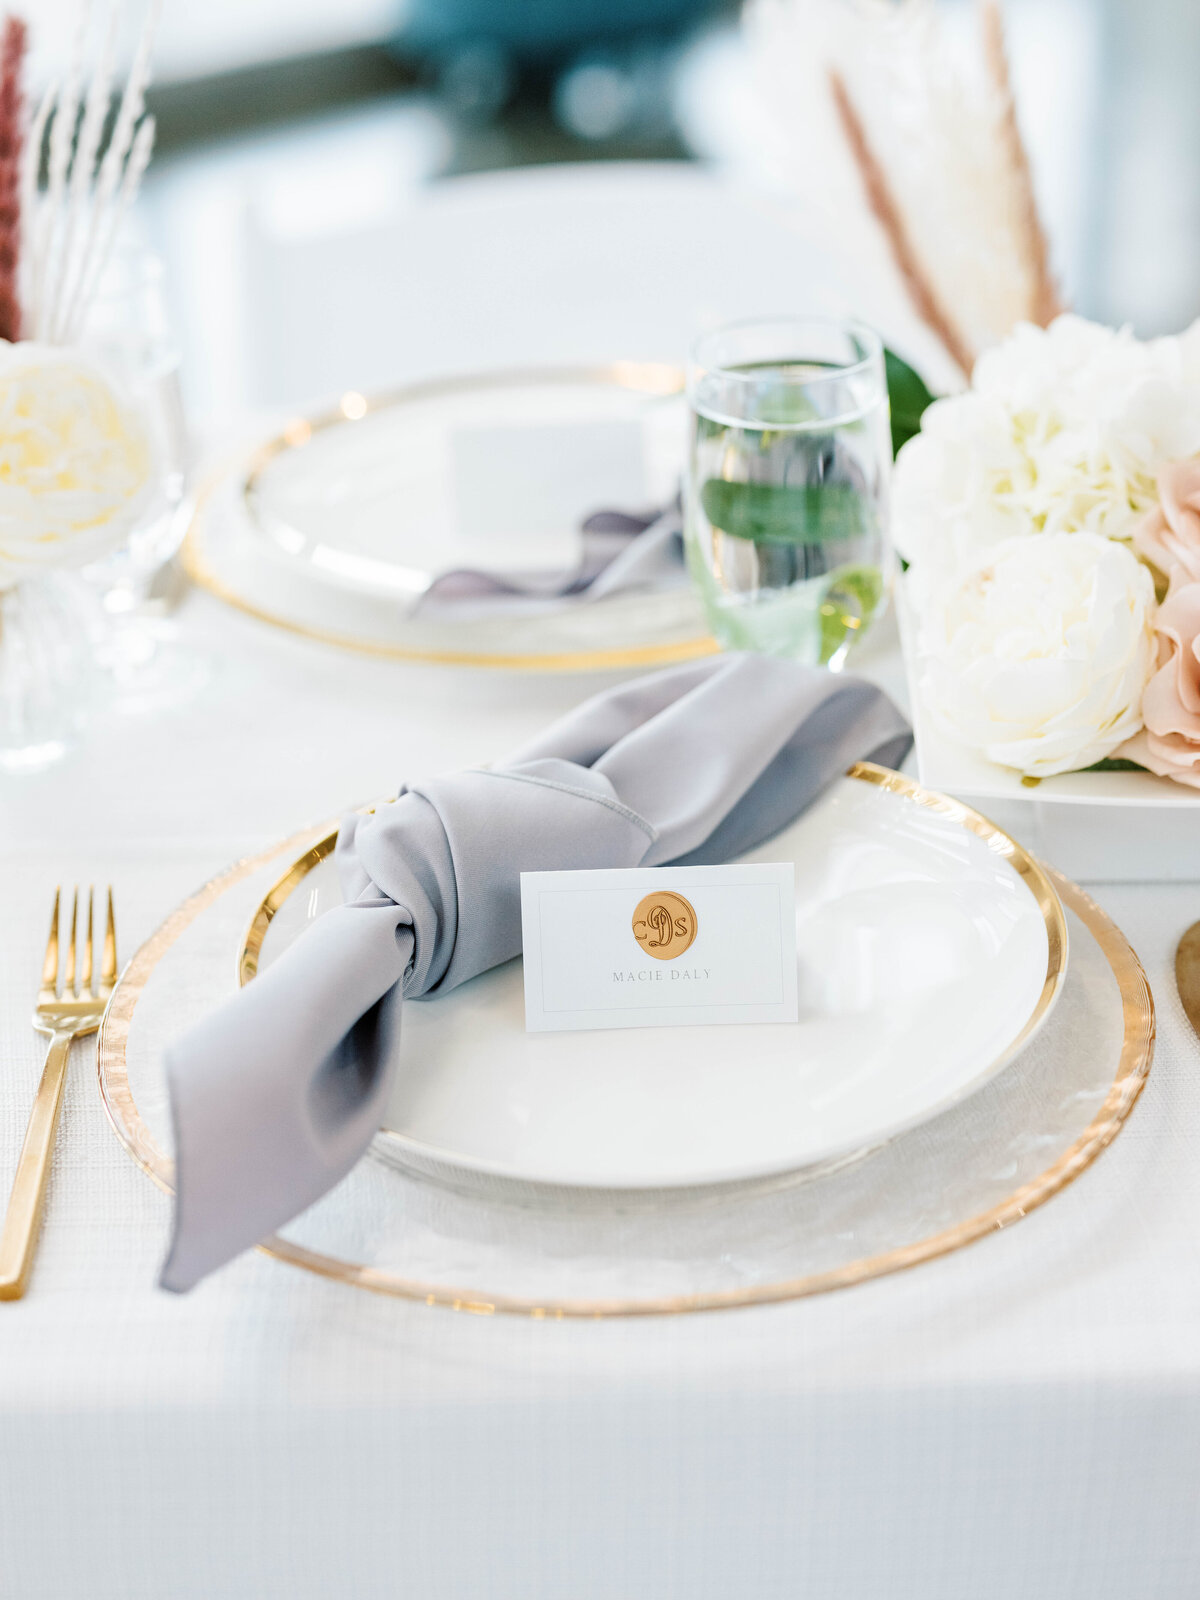 Shaoleen & Collin Reception details- place settings with gold rim charger